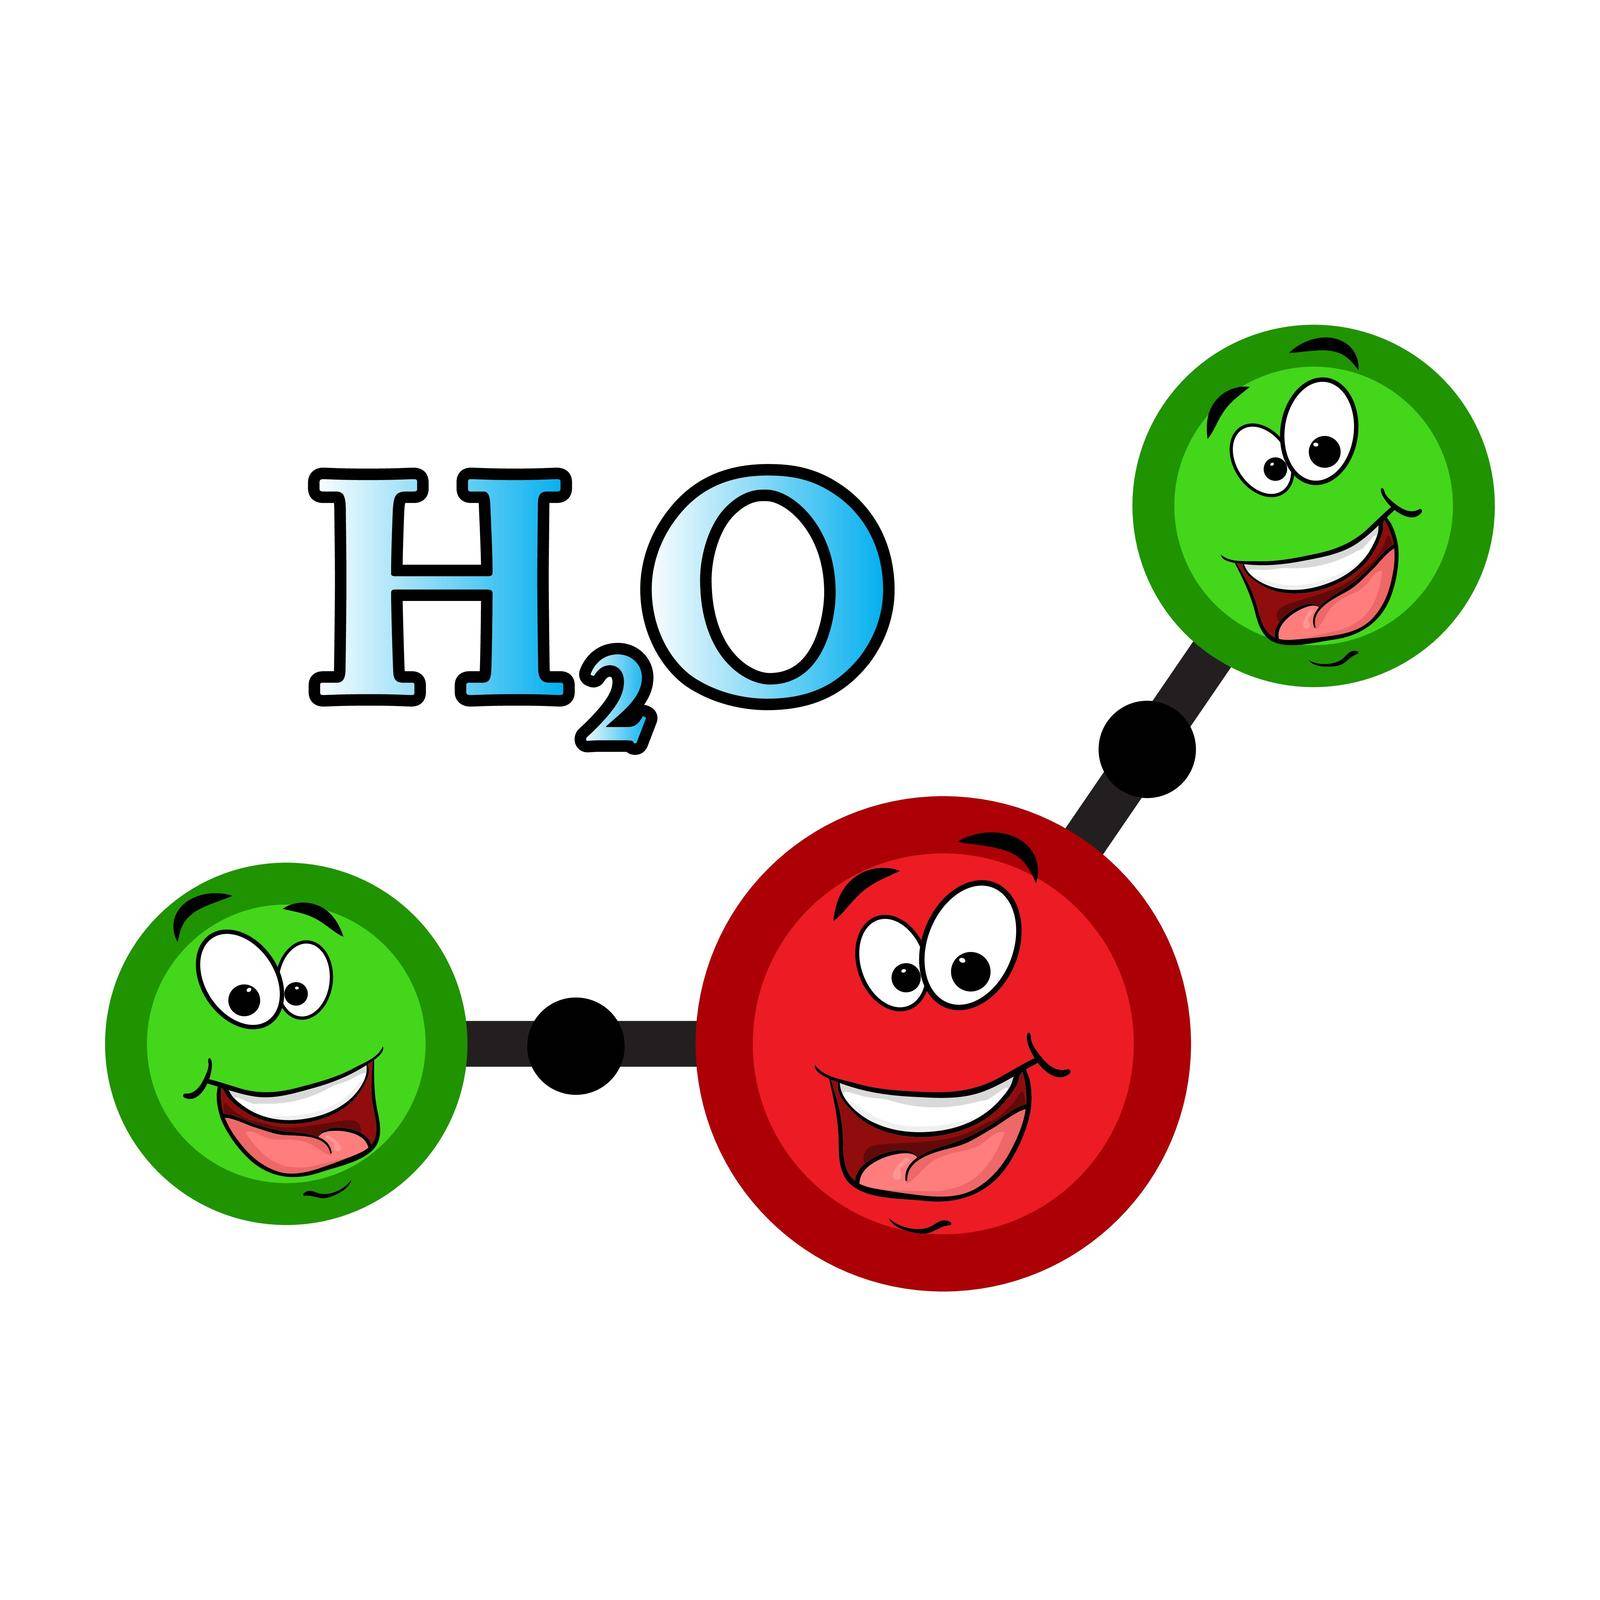 h2o character water molecule structure. Liquid aqua atom formula with eyes and smile. Vector illustration isolated on white background.